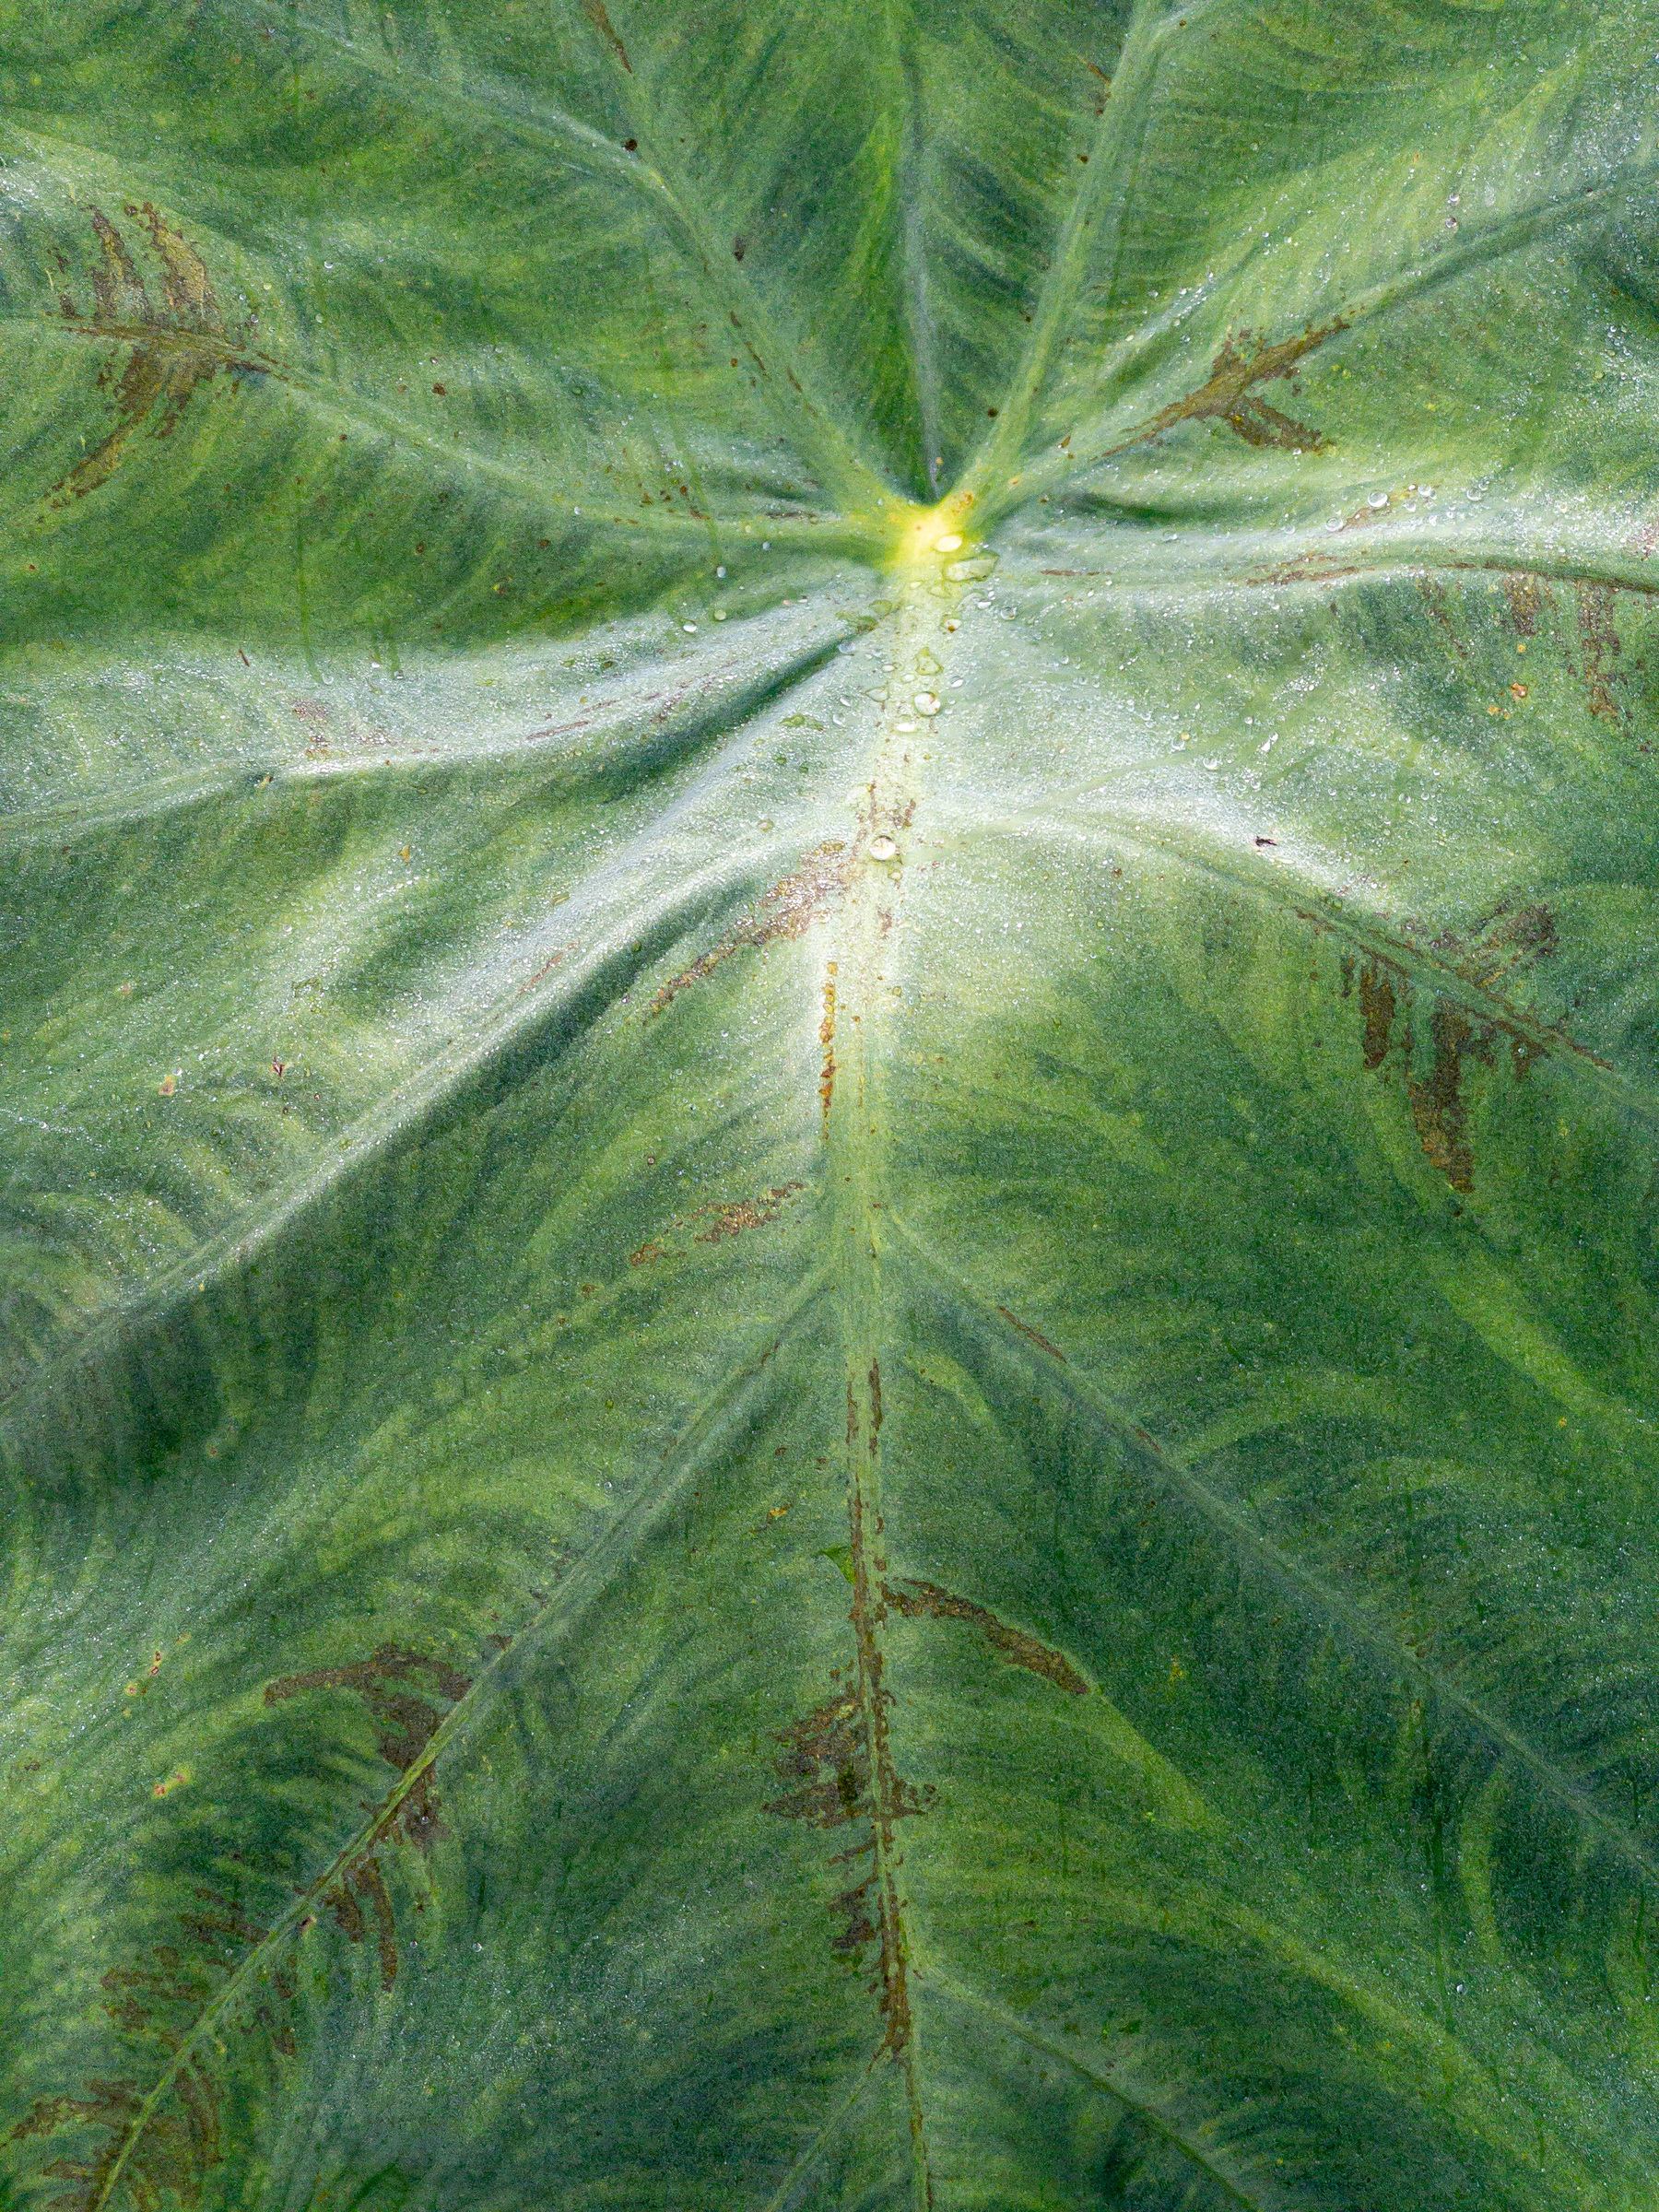 Close up of a tropical plant leaf with center vein running from top to bottom and secondary veins fanning off at a 45 degree angle.